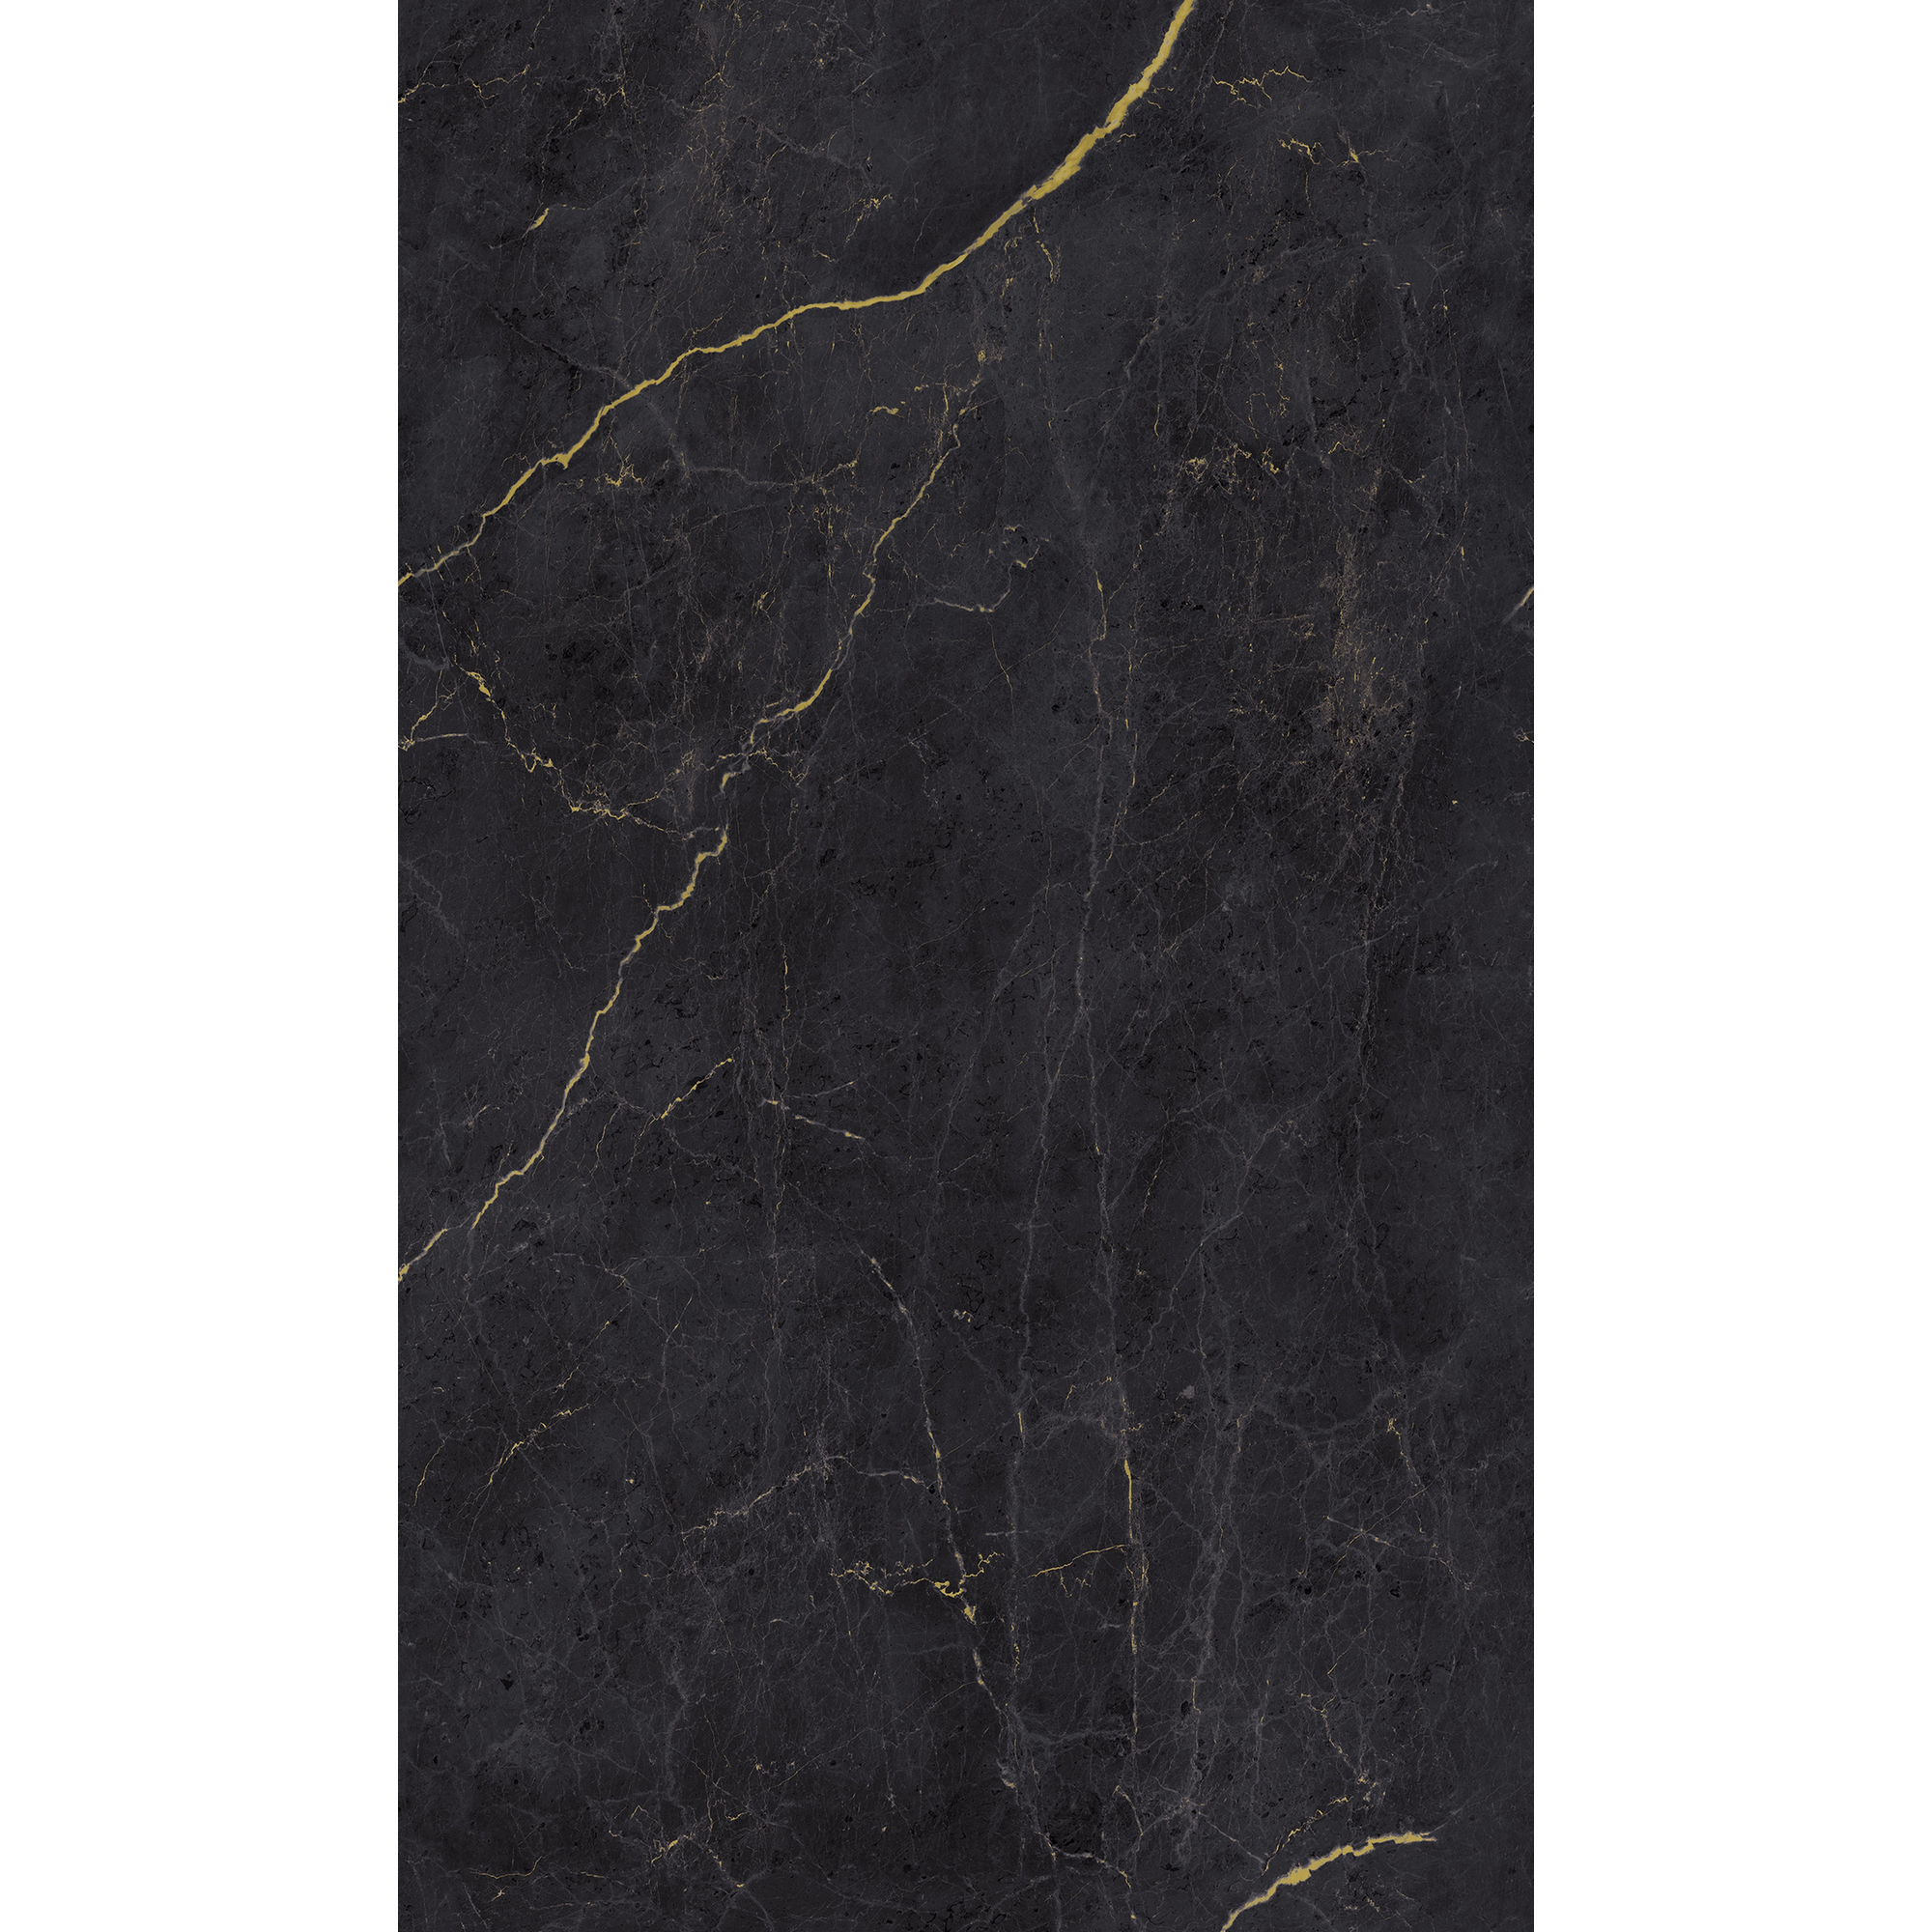 Duschrückwand 'DecoDesign' Softtouch Stein Marmor-Anthrazit-Gold 255 x 150 cm + product picture